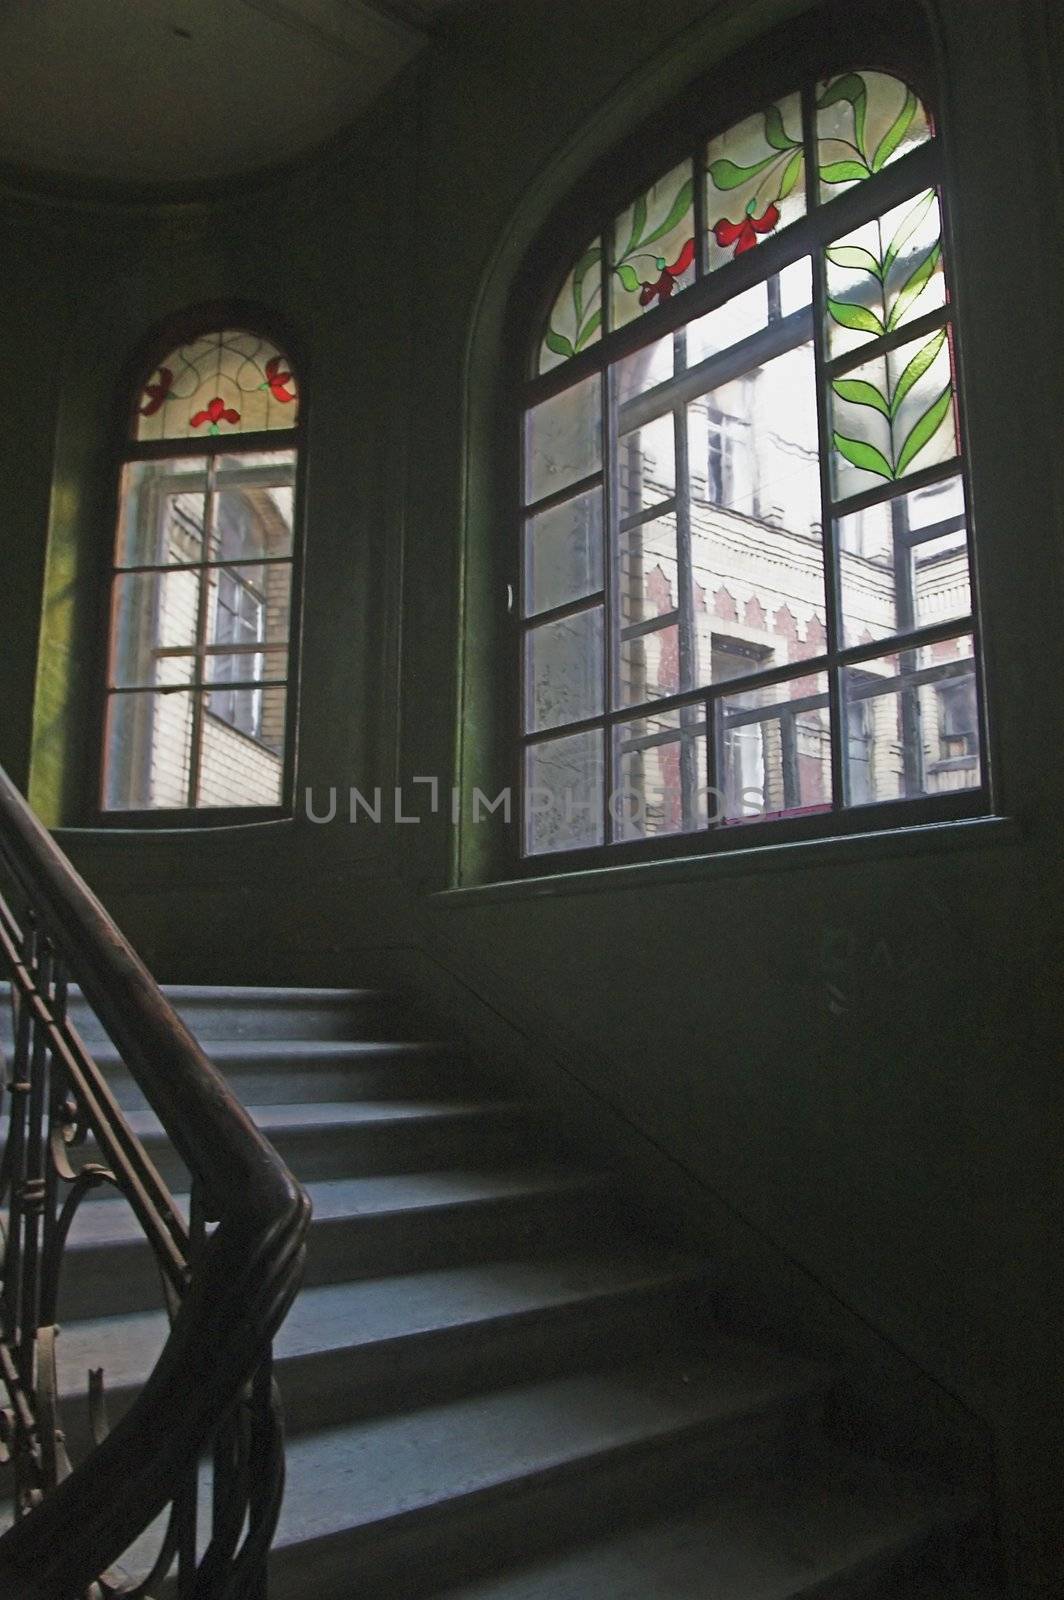 Stairway and stained-glass windows in old building